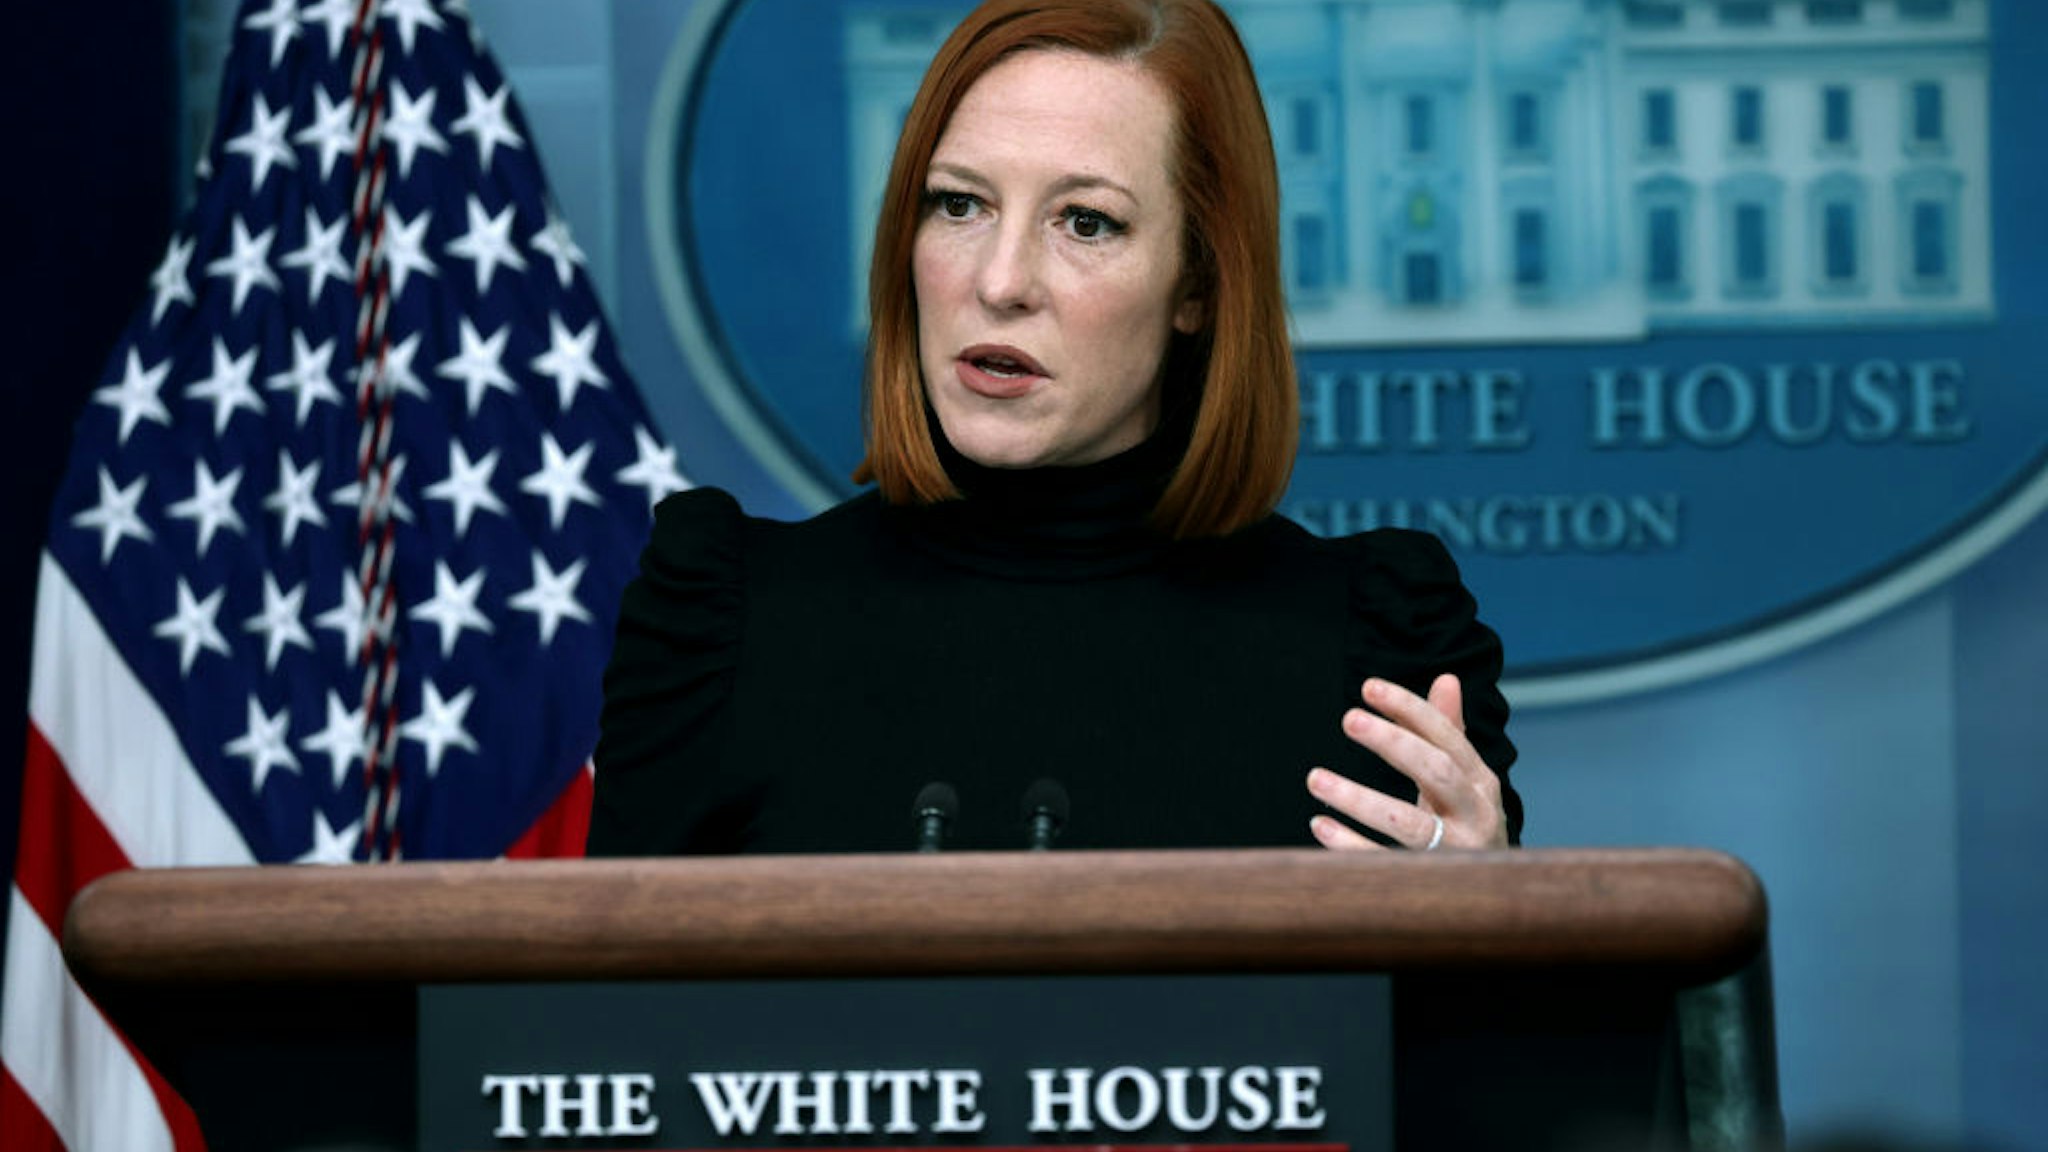 WASHINGTON, DC - FEBRUARY 18: White House Press Secretary Jen Psaki speaks during a White House daily briefing at the James S. Brady Press Briefing Room of the White House on February 18, 2022 in Washington, DC. Psaki held a daily news briefing to answer questions, including the Ukraine-Russia border crisis, from members of the press. (Photo by Alex Wong/Getty Images)